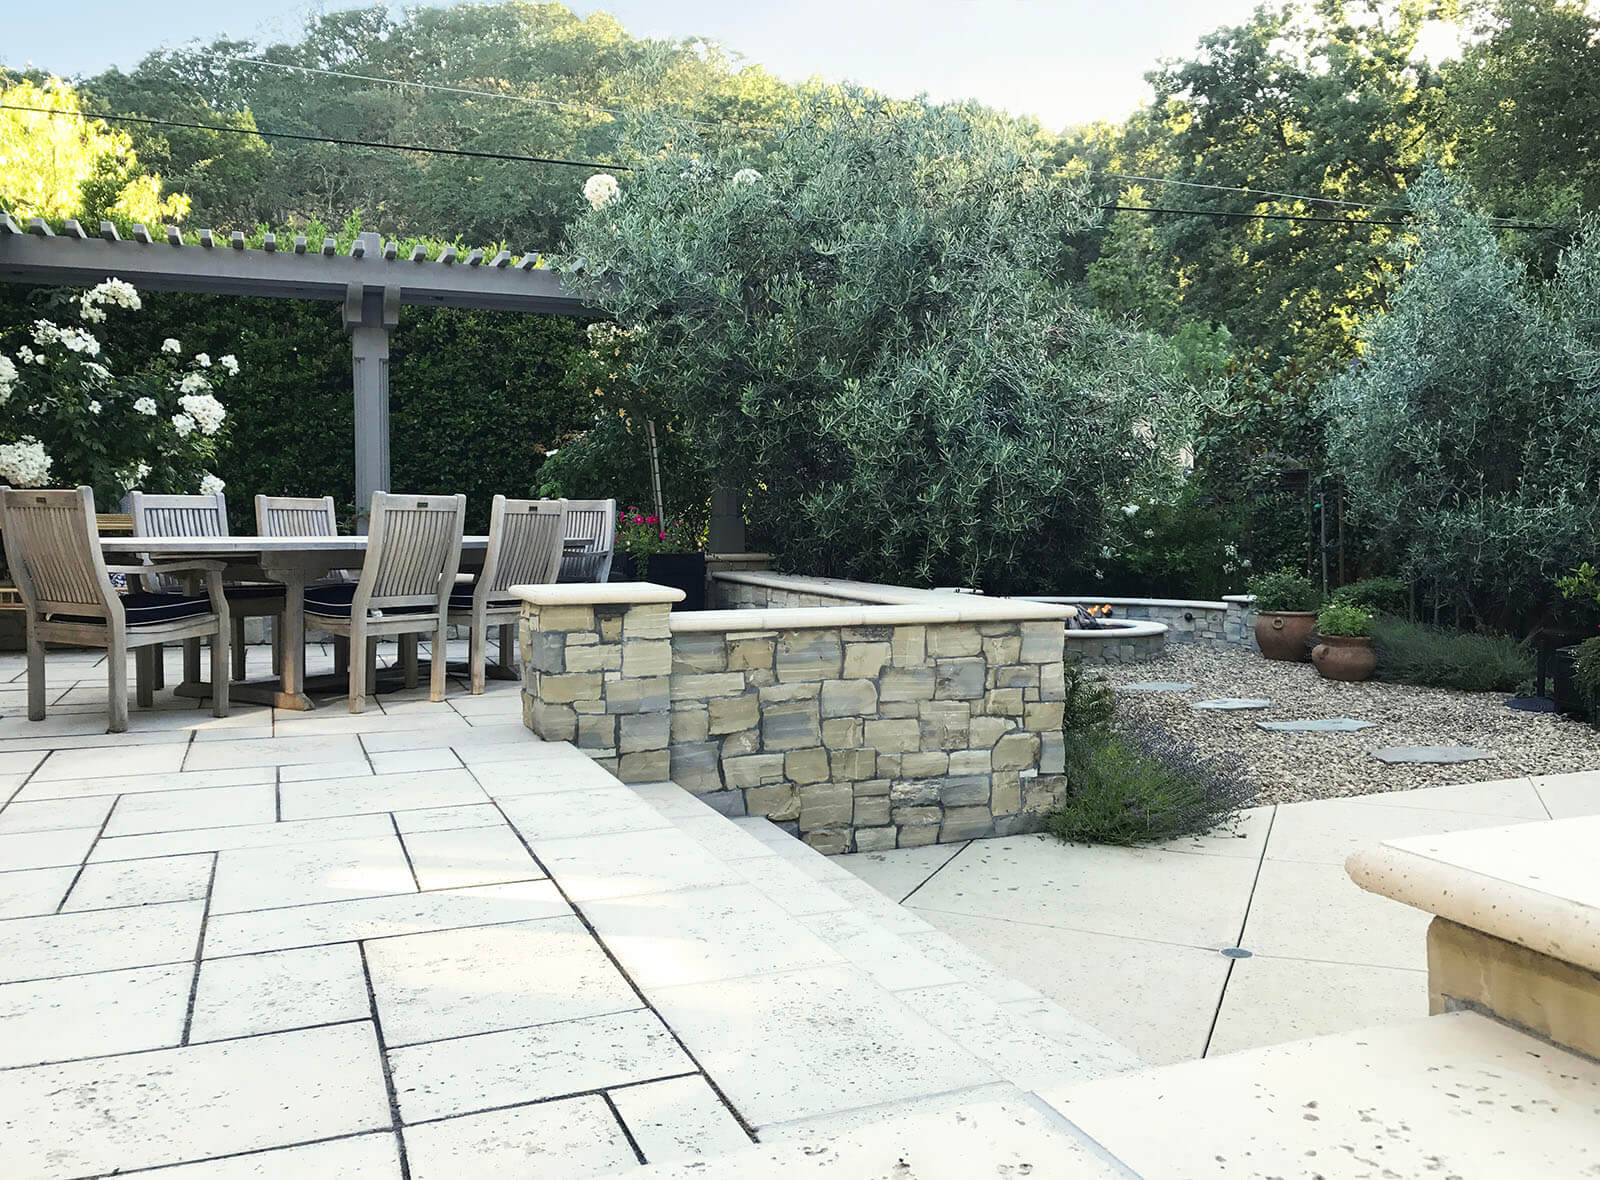 White stone patio with lower area and stone garden surrounded by greenery